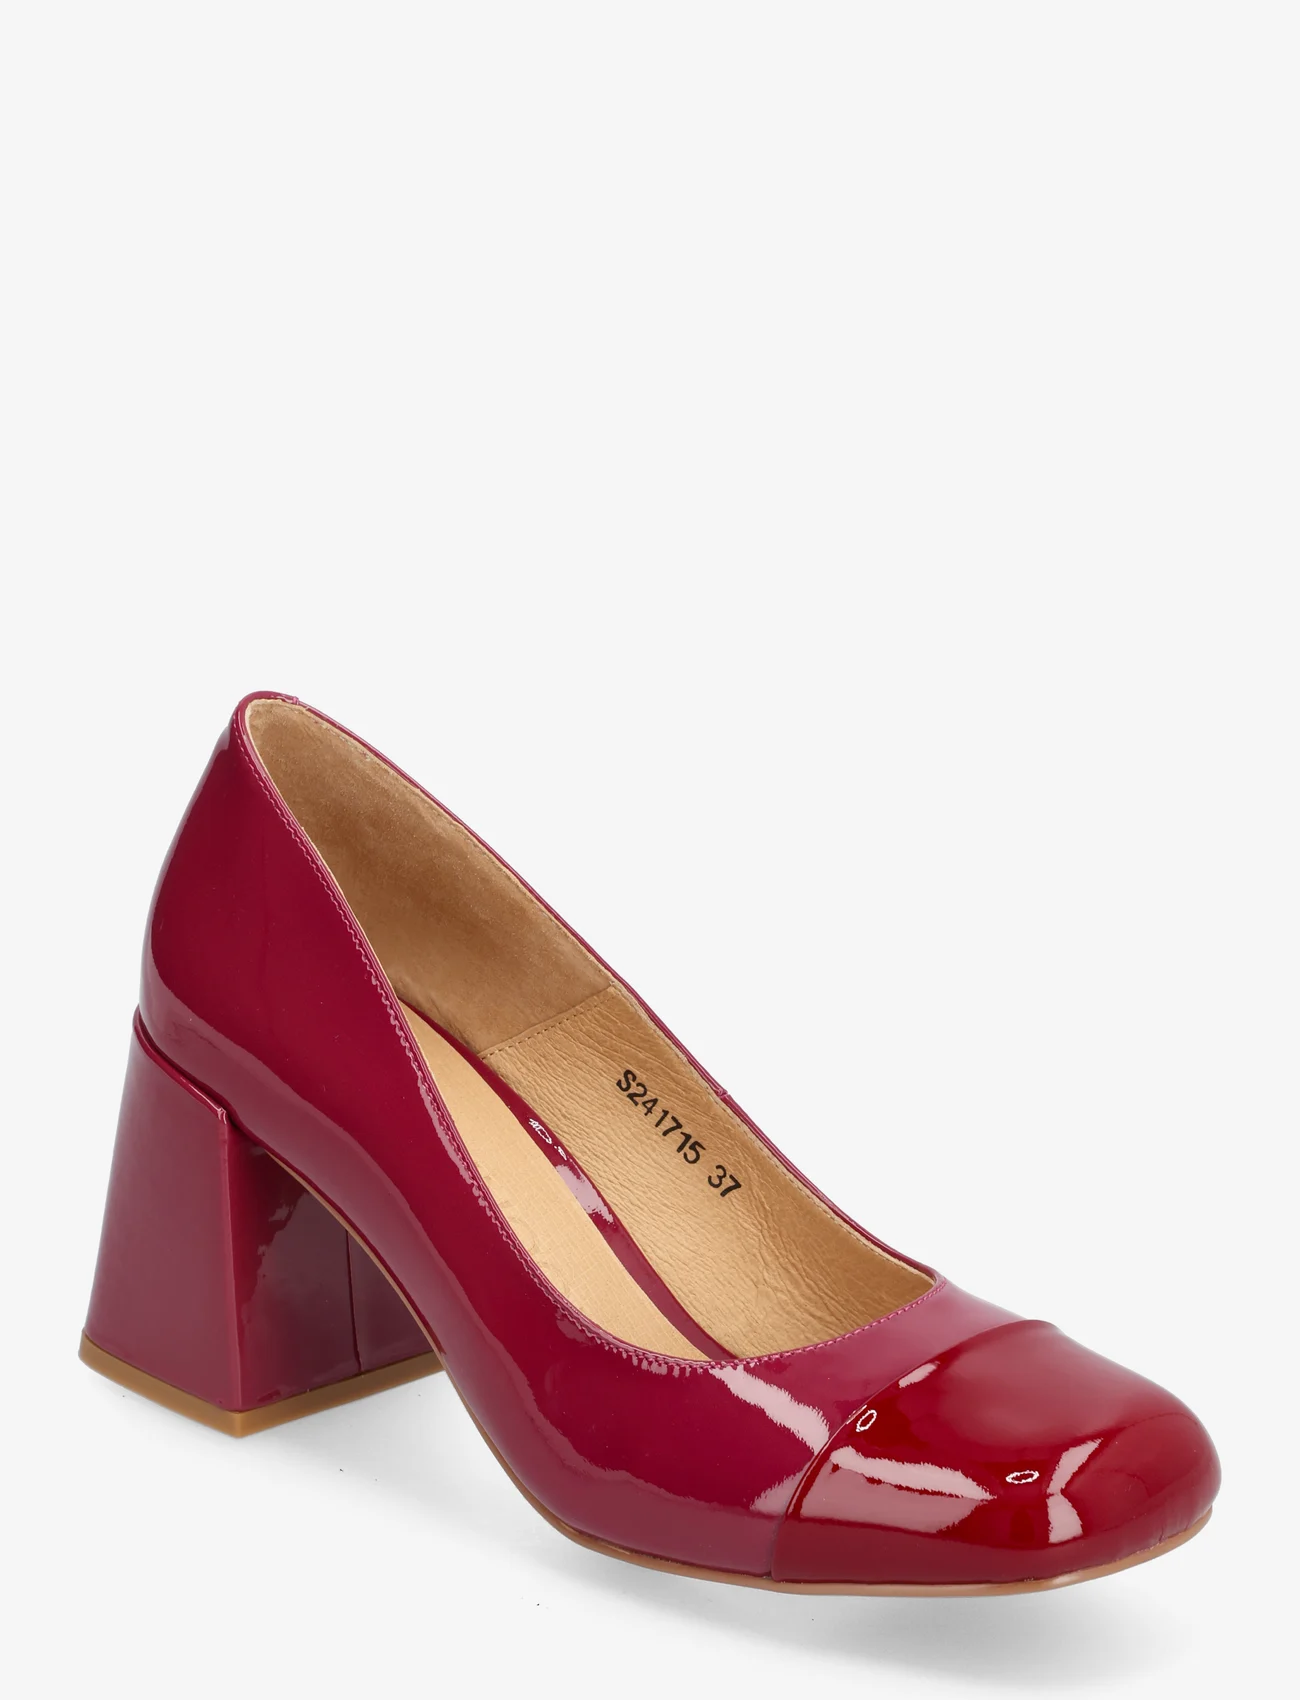 Sofie Schnoor - Stiletto - peoriided outlet-hindadega - berry red - 0